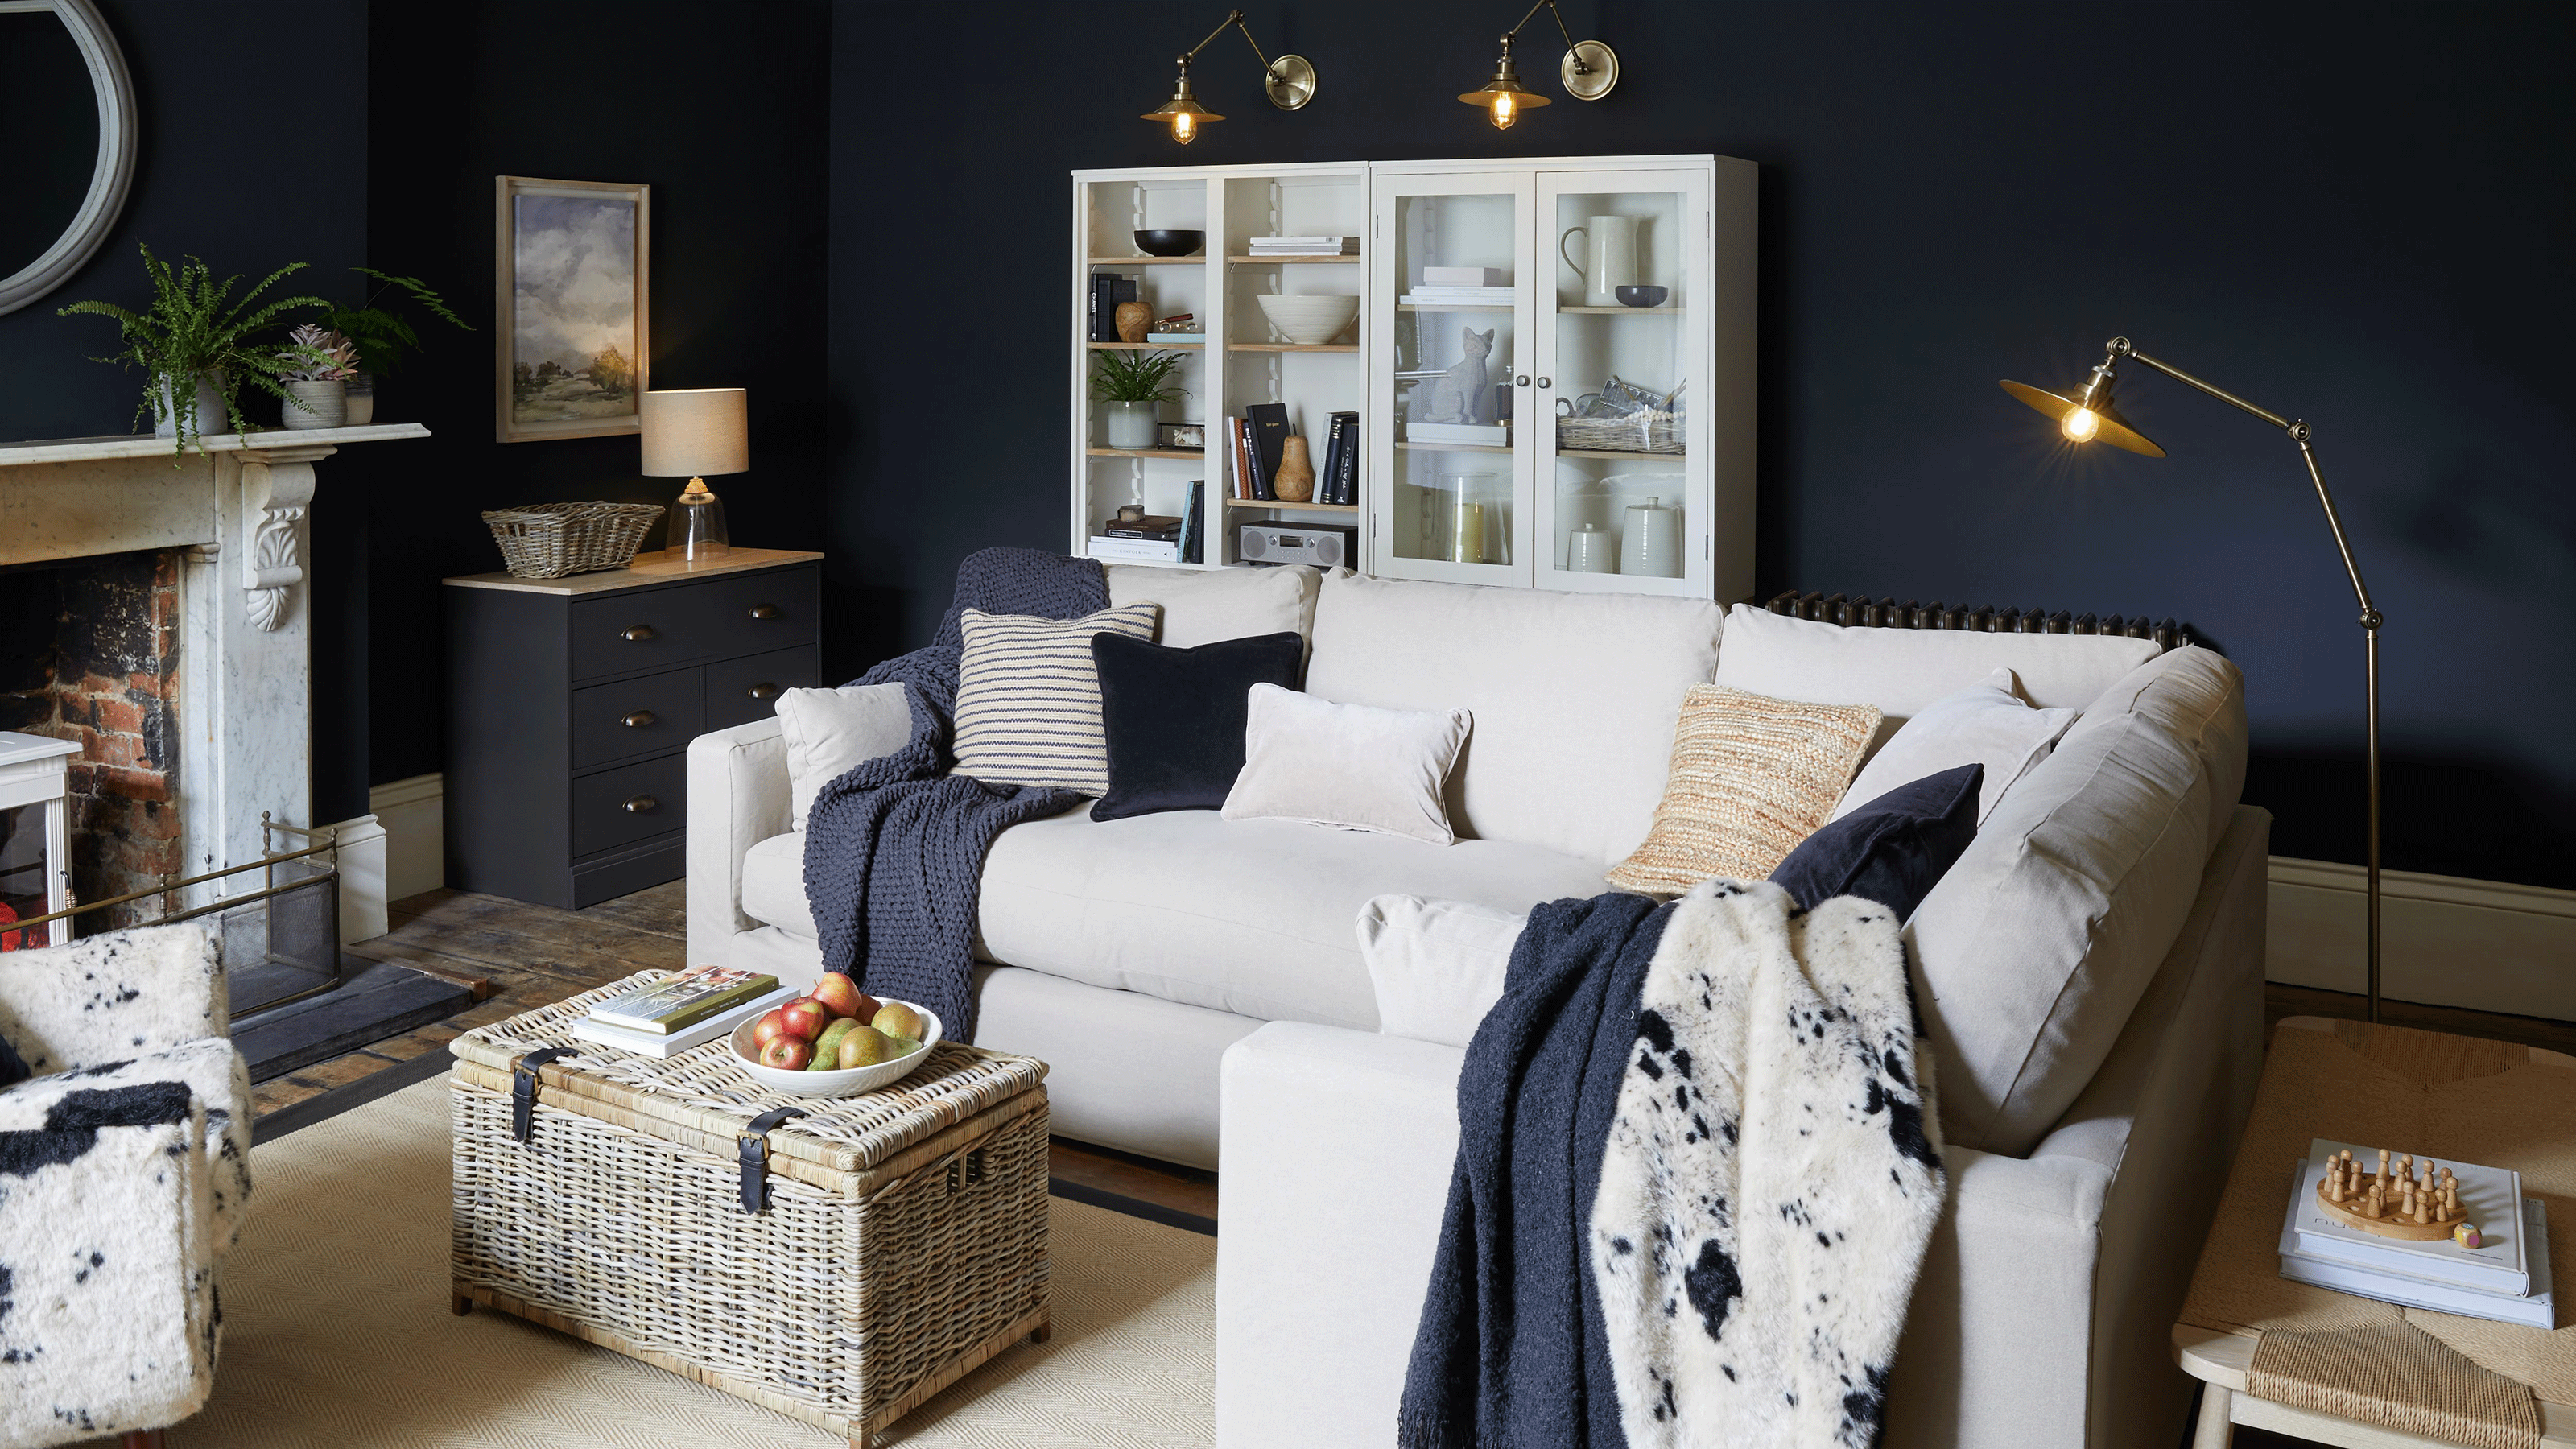 Arrange living room furniture to look chic like this blue and white one with variety of light sources including table lamp, floor lamp and wall sconces